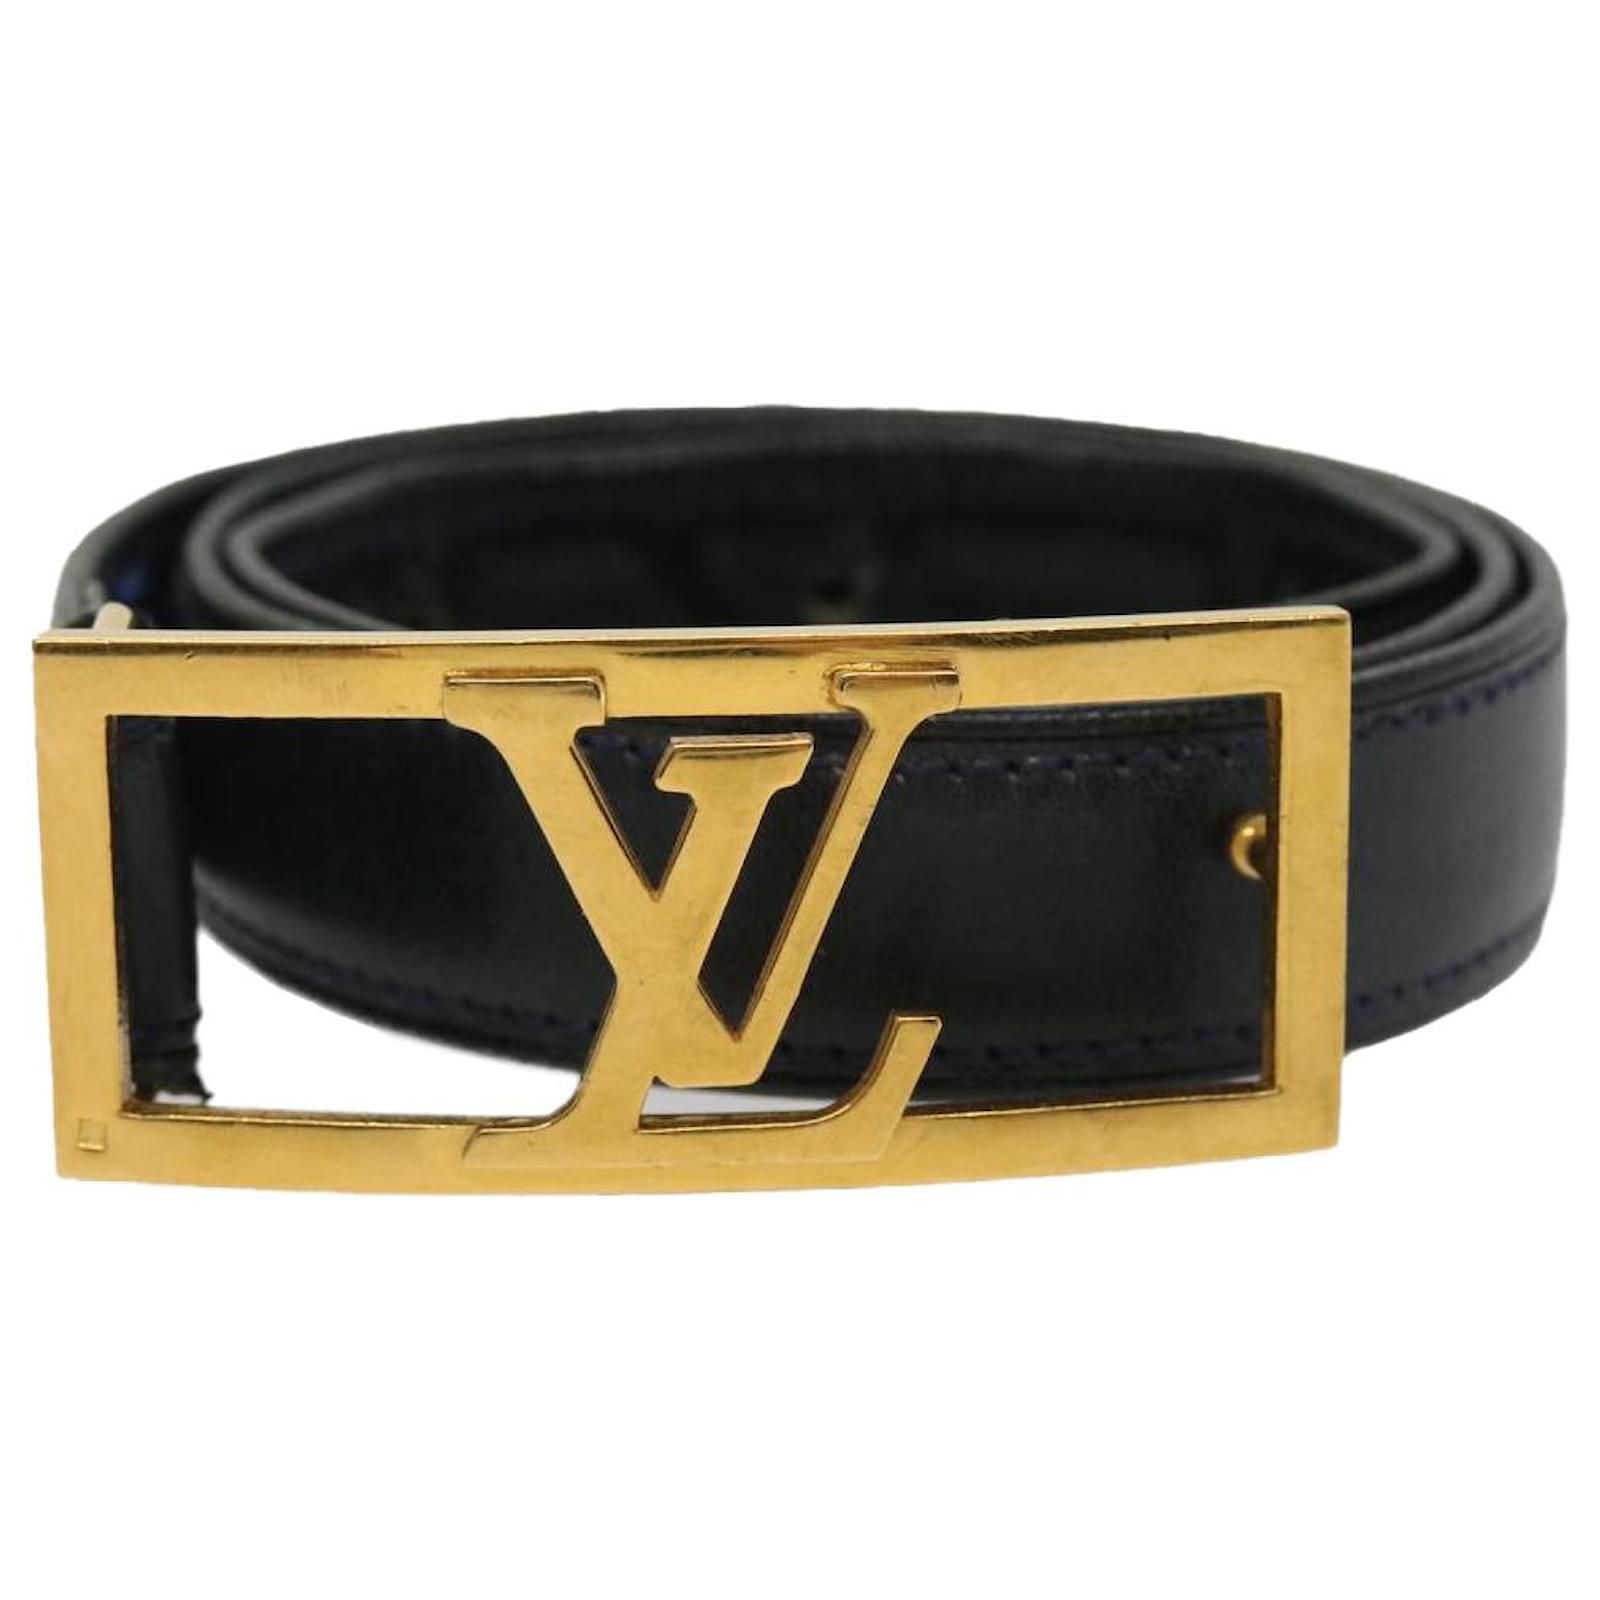 LOUIS VUITTON Black grained leather belt with gold jew…